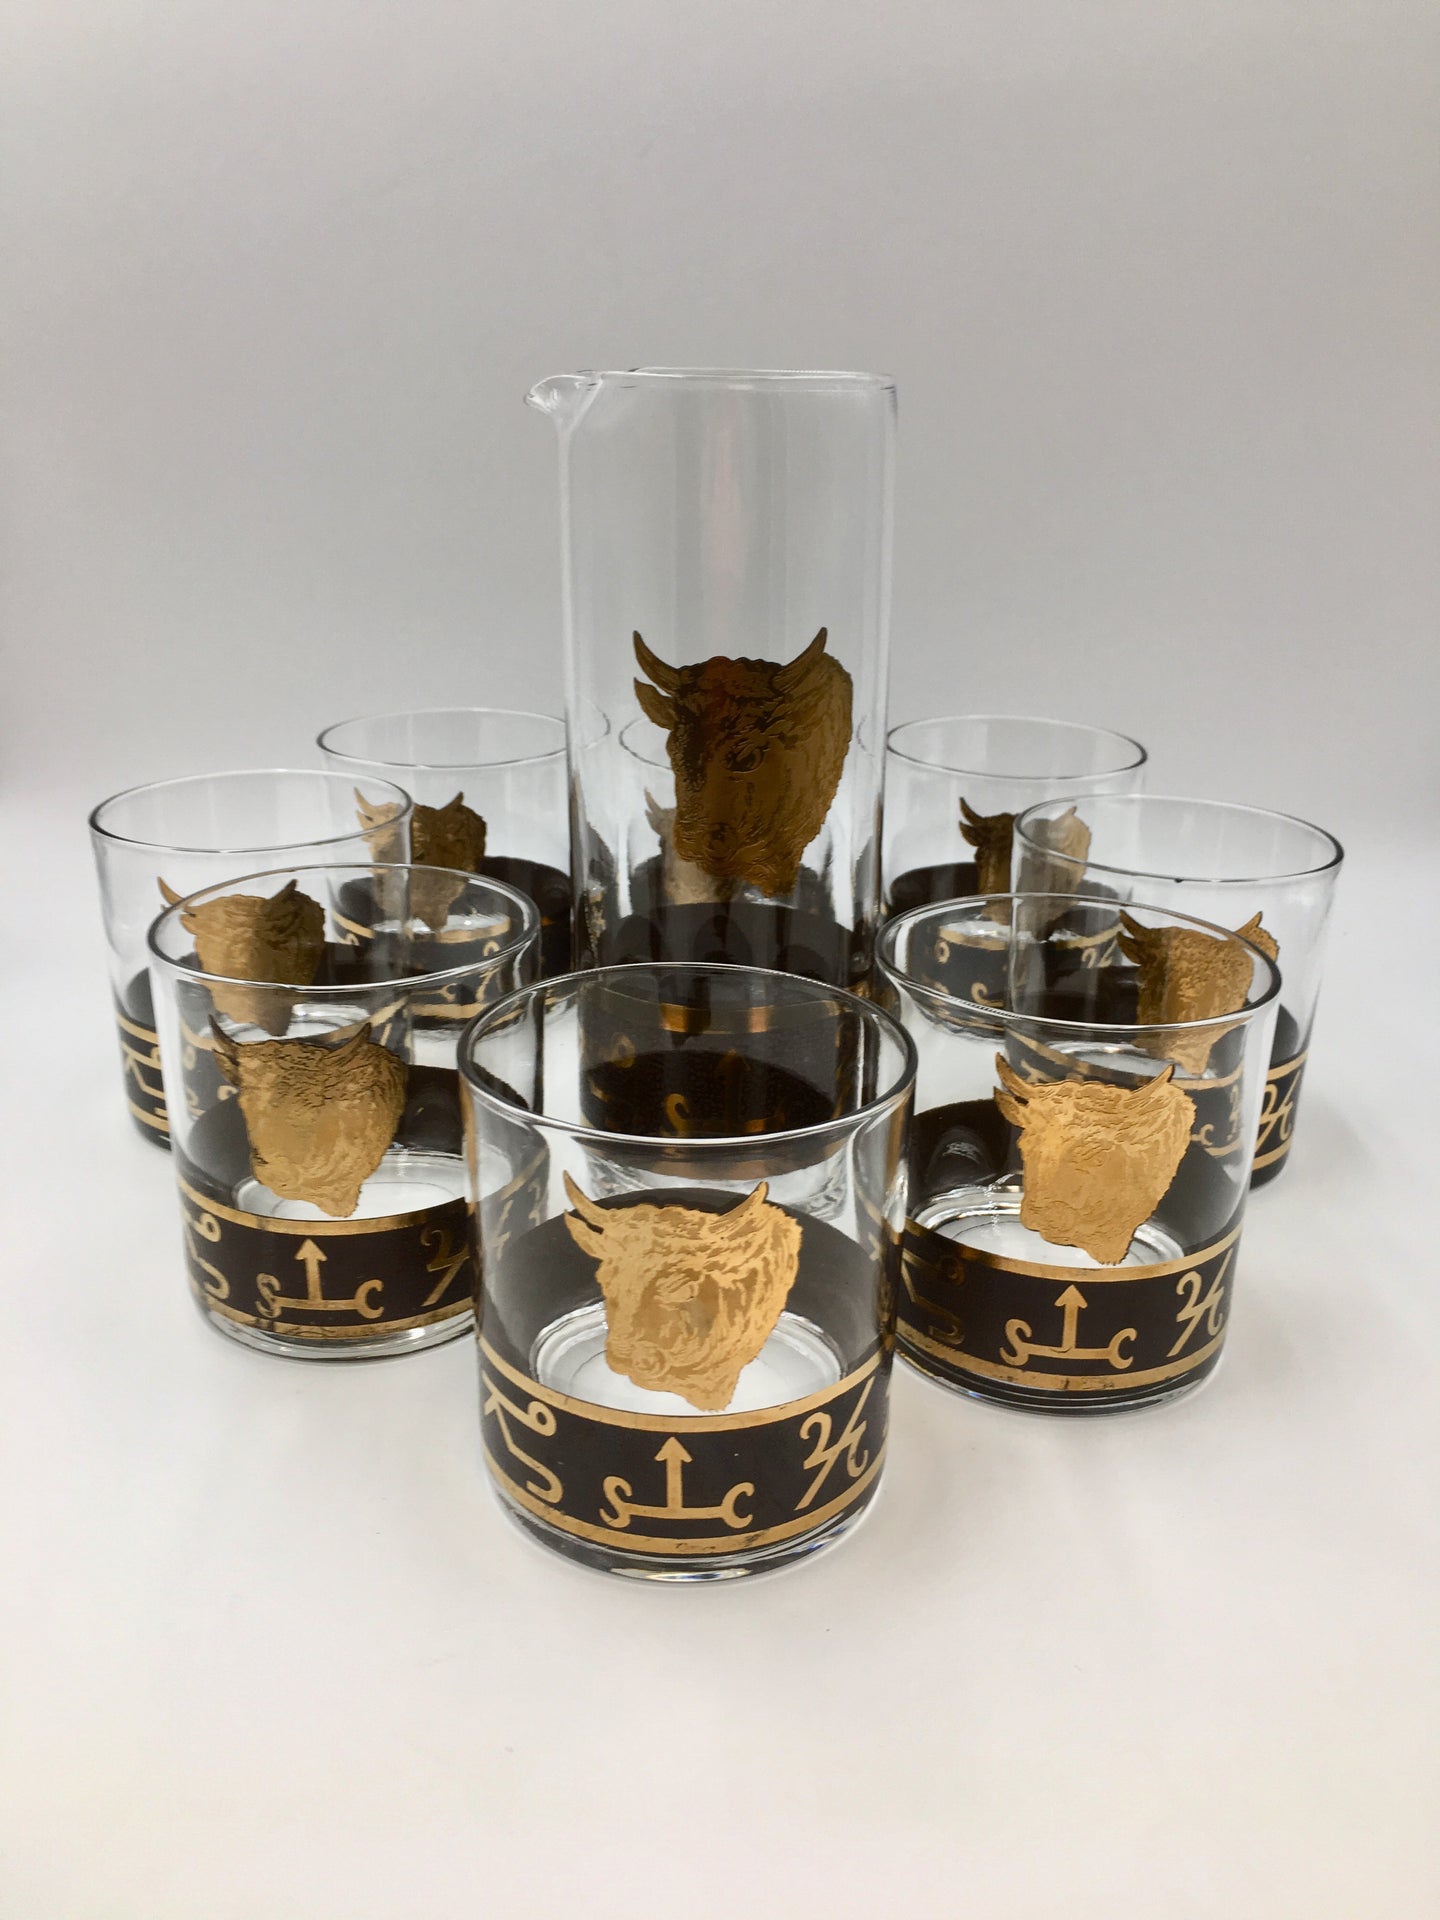 Vintage Cocktail Set of Western Ranch Barware with Gold Bulls